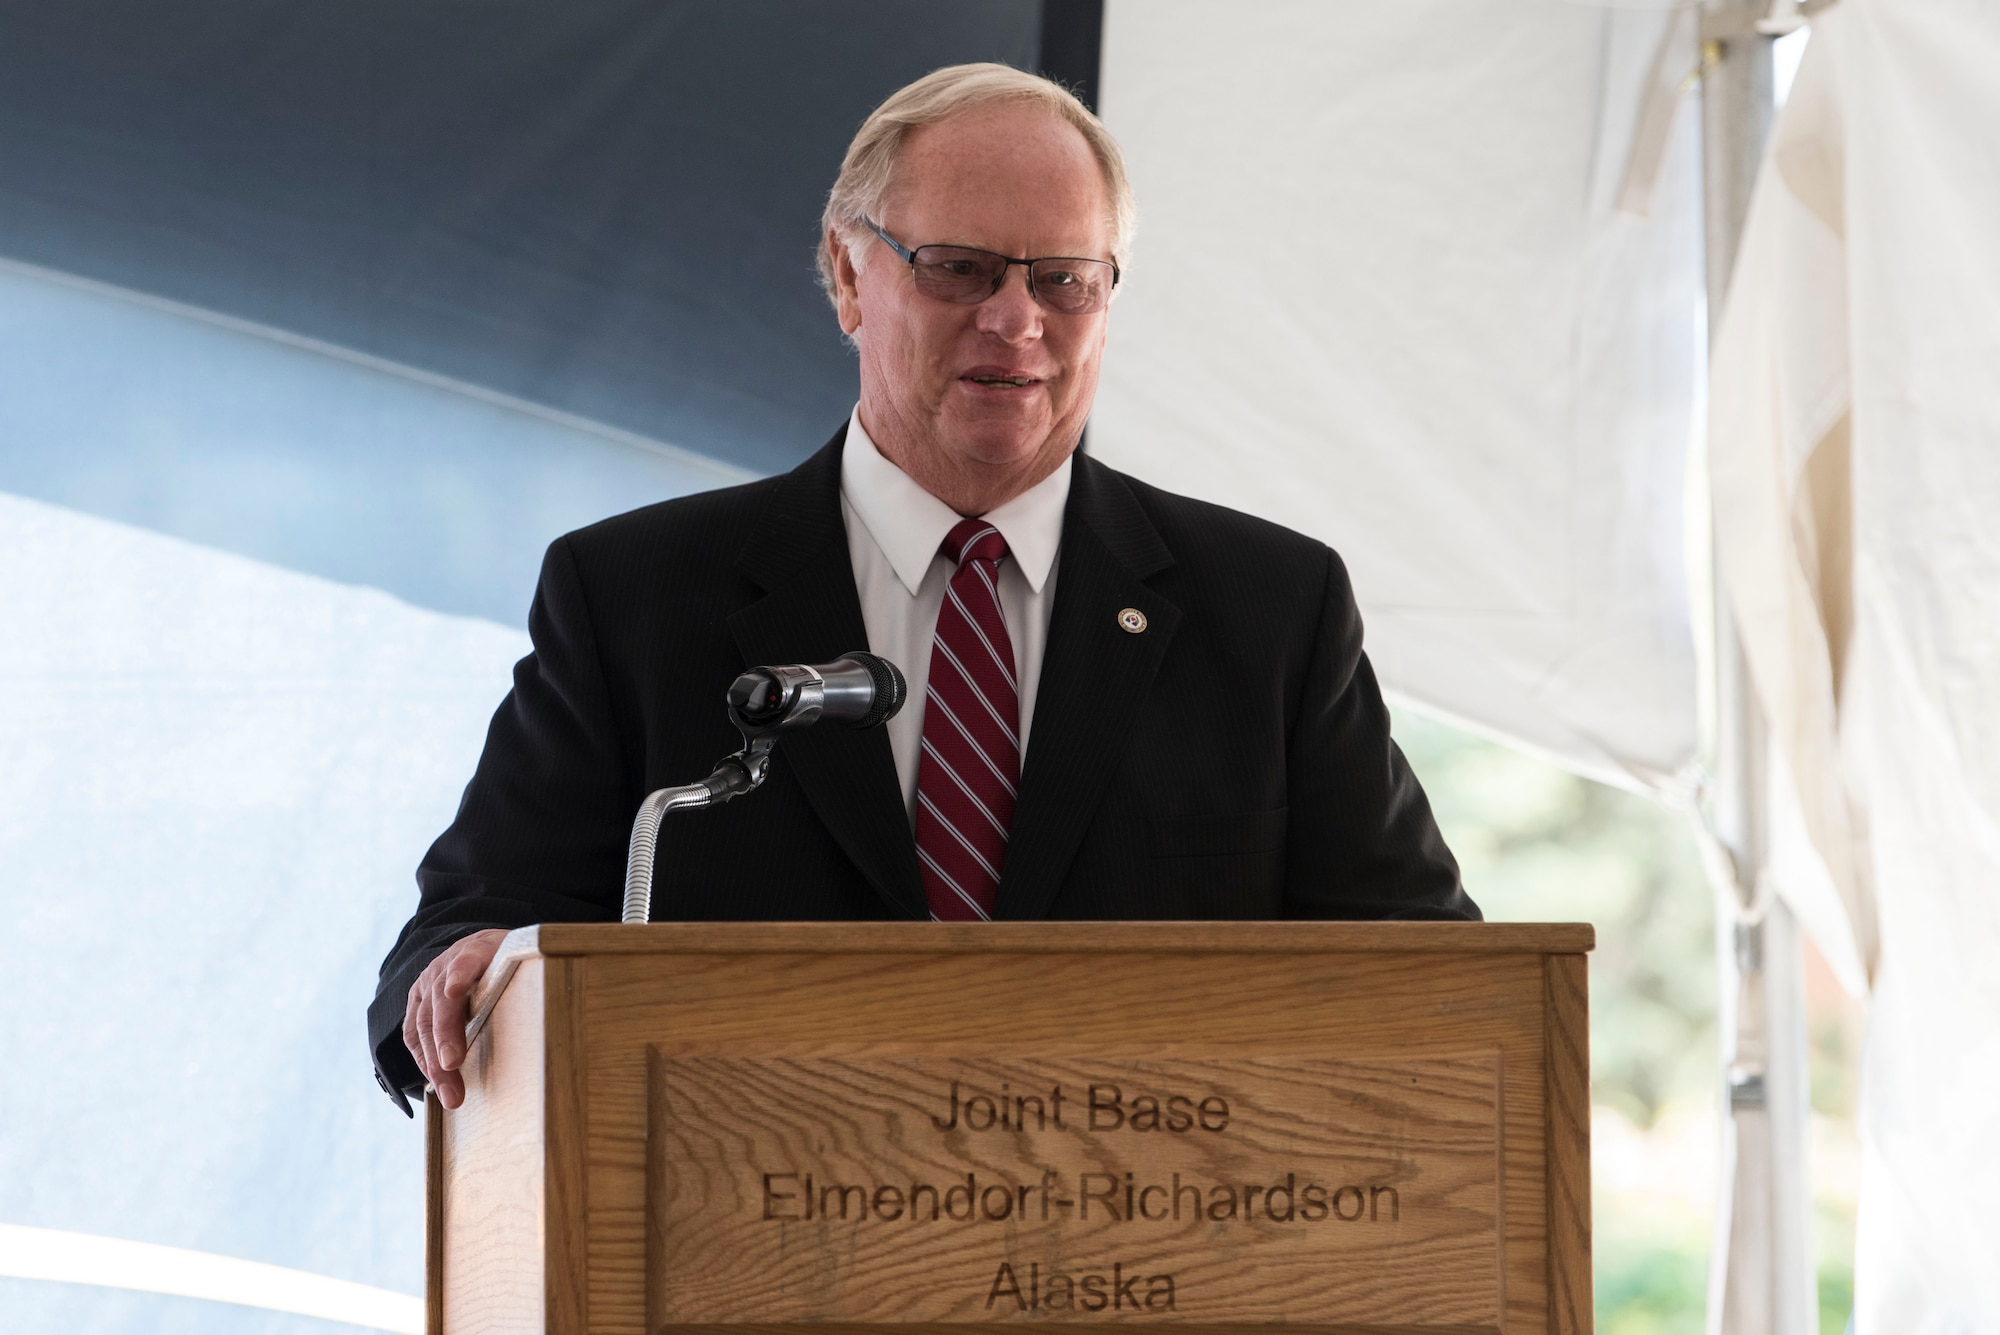 Terry Parks, Friends of Fisher House president, speaks during the opening ceremony for Fisher House II at Joint Base Elmendorf-Richardson, Alaska, Sep. 10, 2018. The opening ceremony featured an array of key speakers, the 9th Army Band, Air Force Honor Guard, a ribbon-cutting and a walk-through. The Fisher House program is a unique private-public partnership established to improve the quality of life for military members, retirees, veterans and their families.